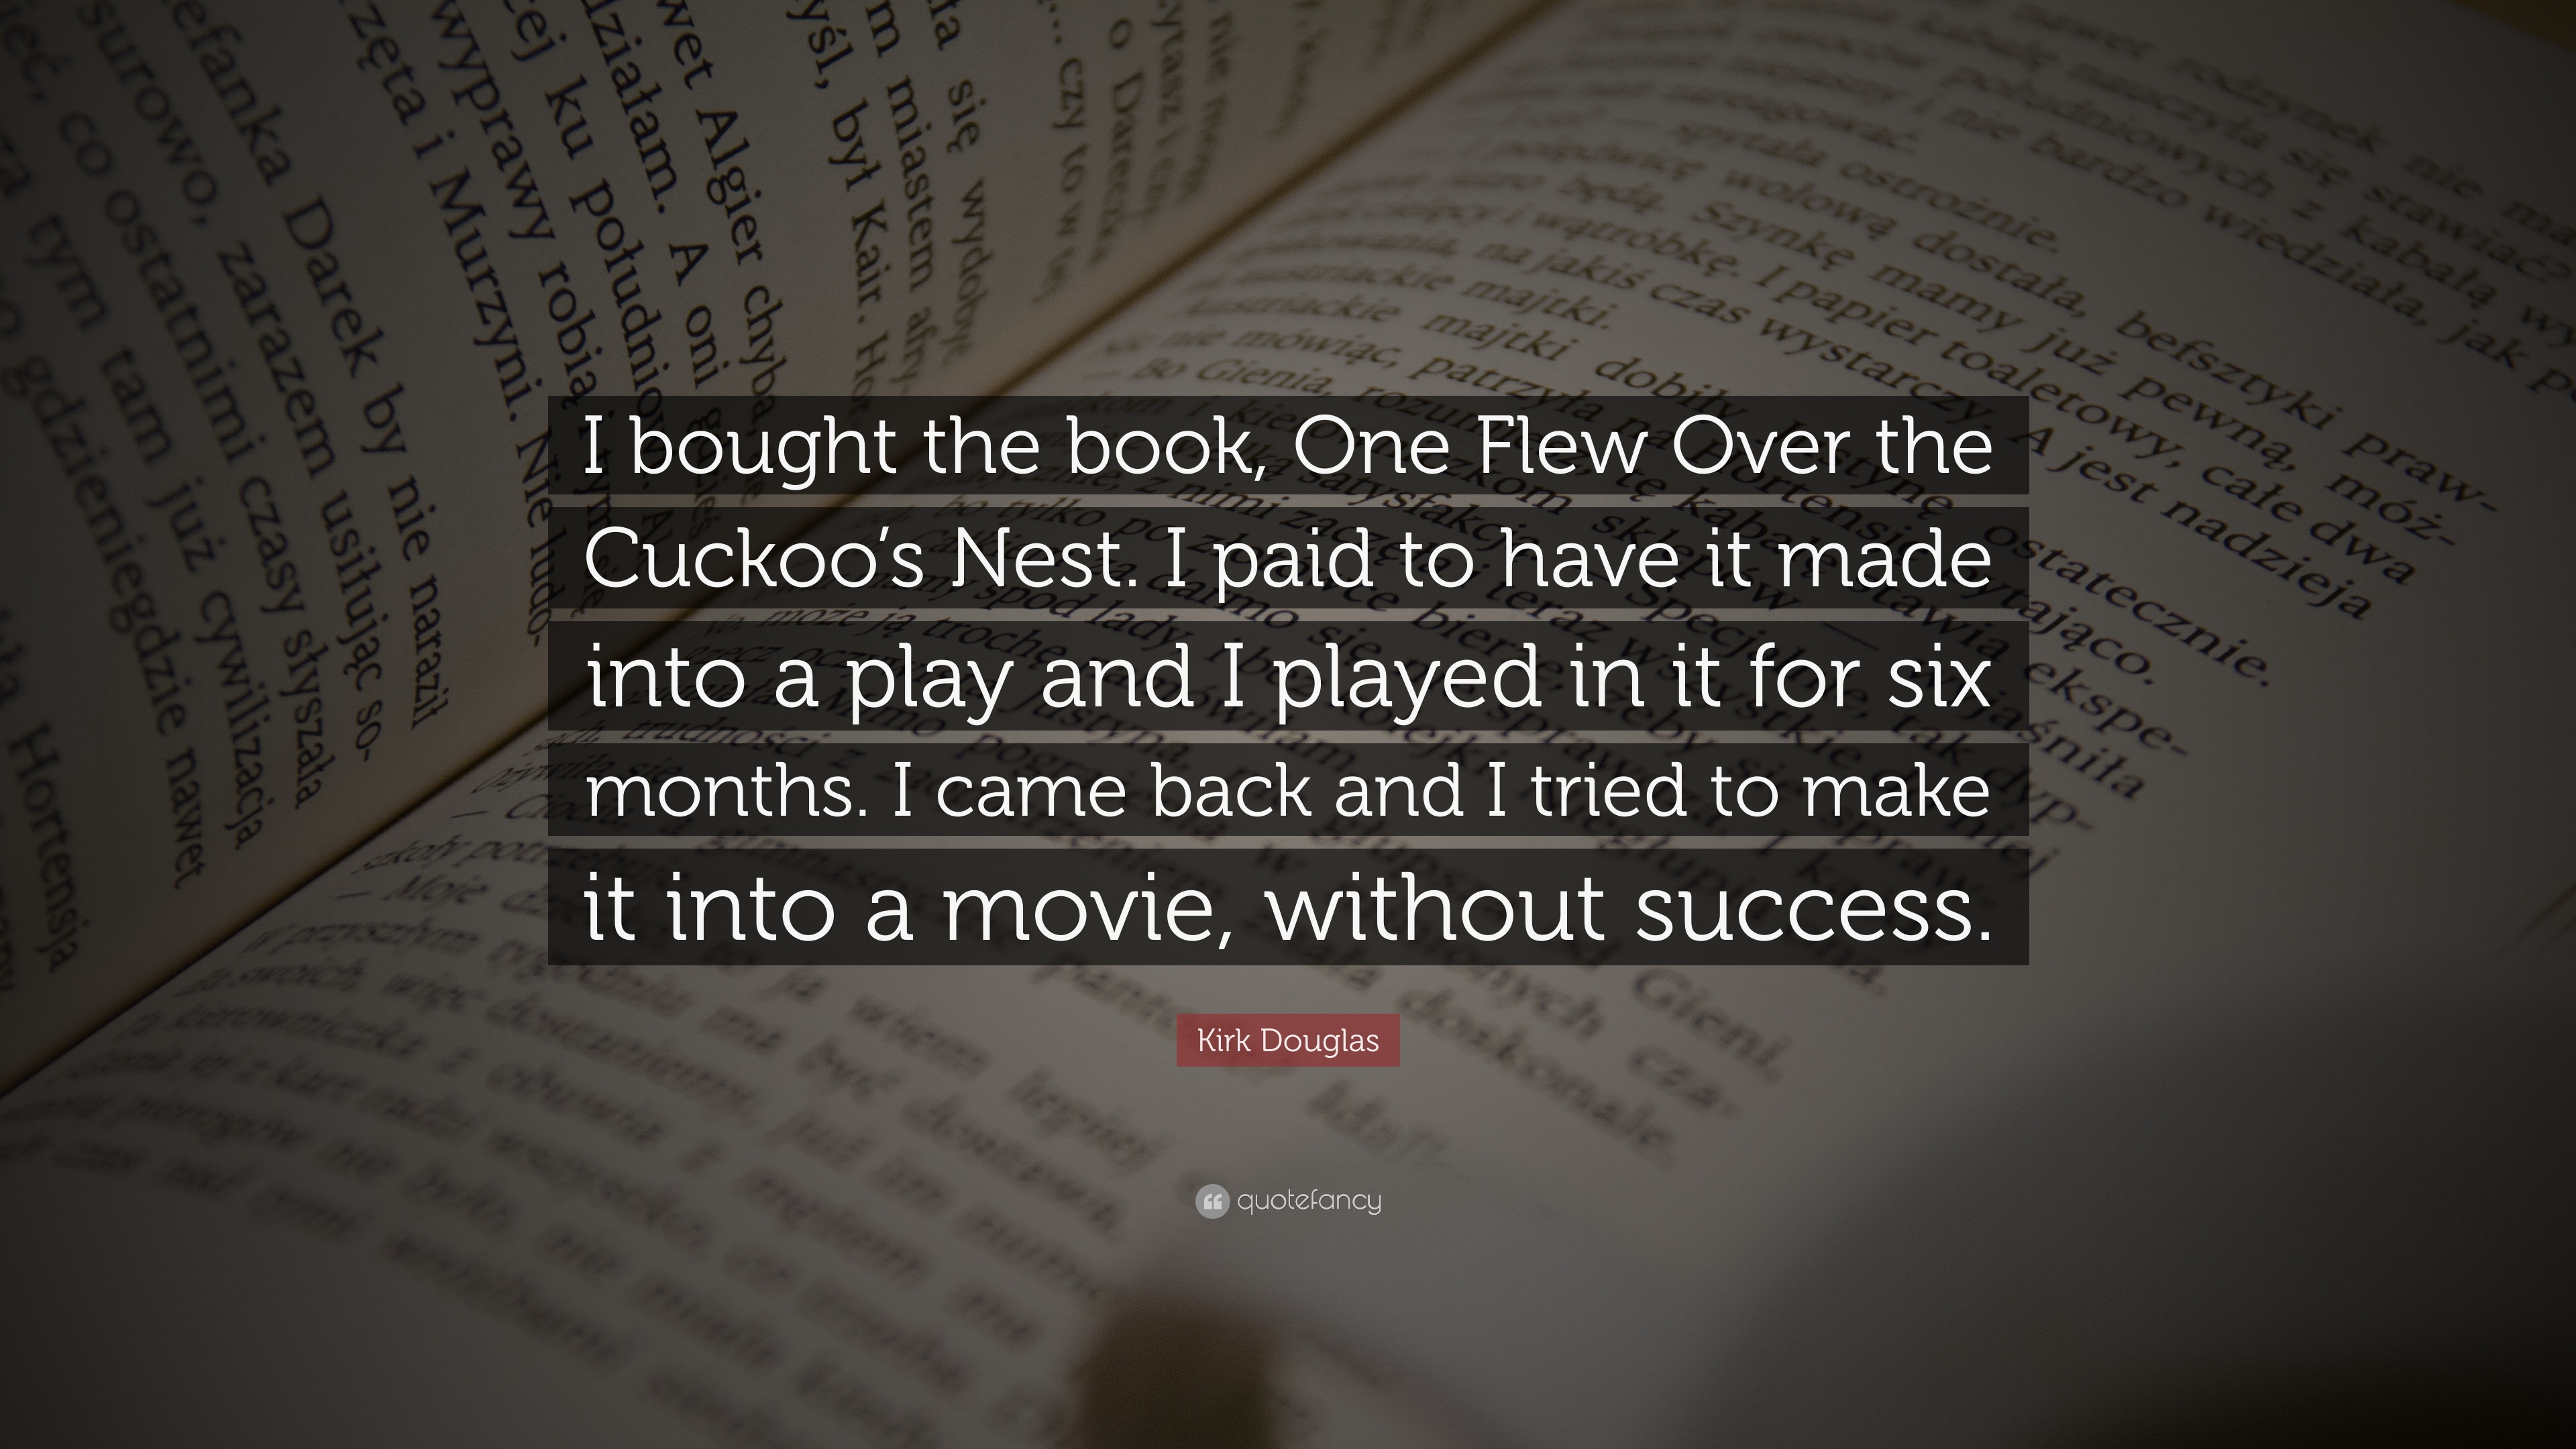 Kirk Douglas Quote: “I bought the book, One Flew Over the Cuckoo's